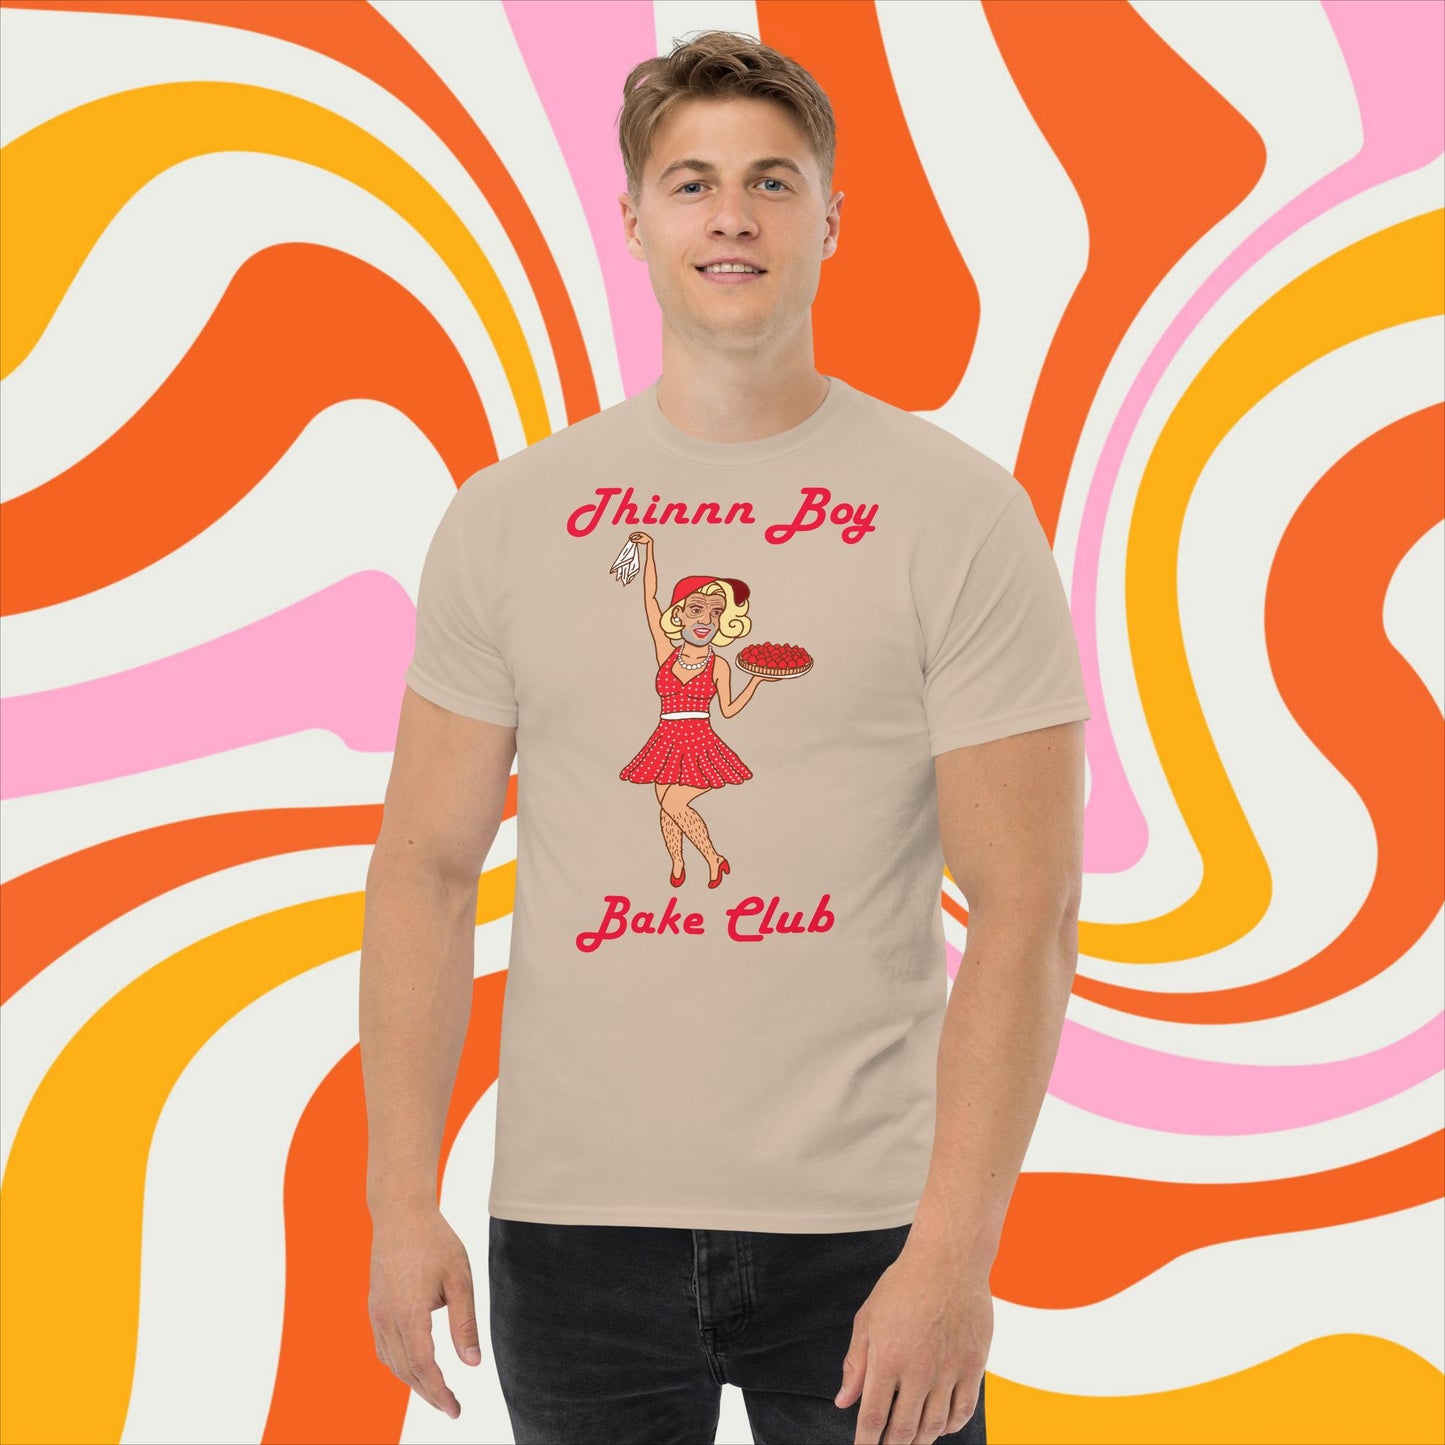 Thinnn Boy Bake Club The Fighter and The Kid TFATK Podcast Comedy 60s retro housewife Bryan Callen classic tee Next Cult Brand